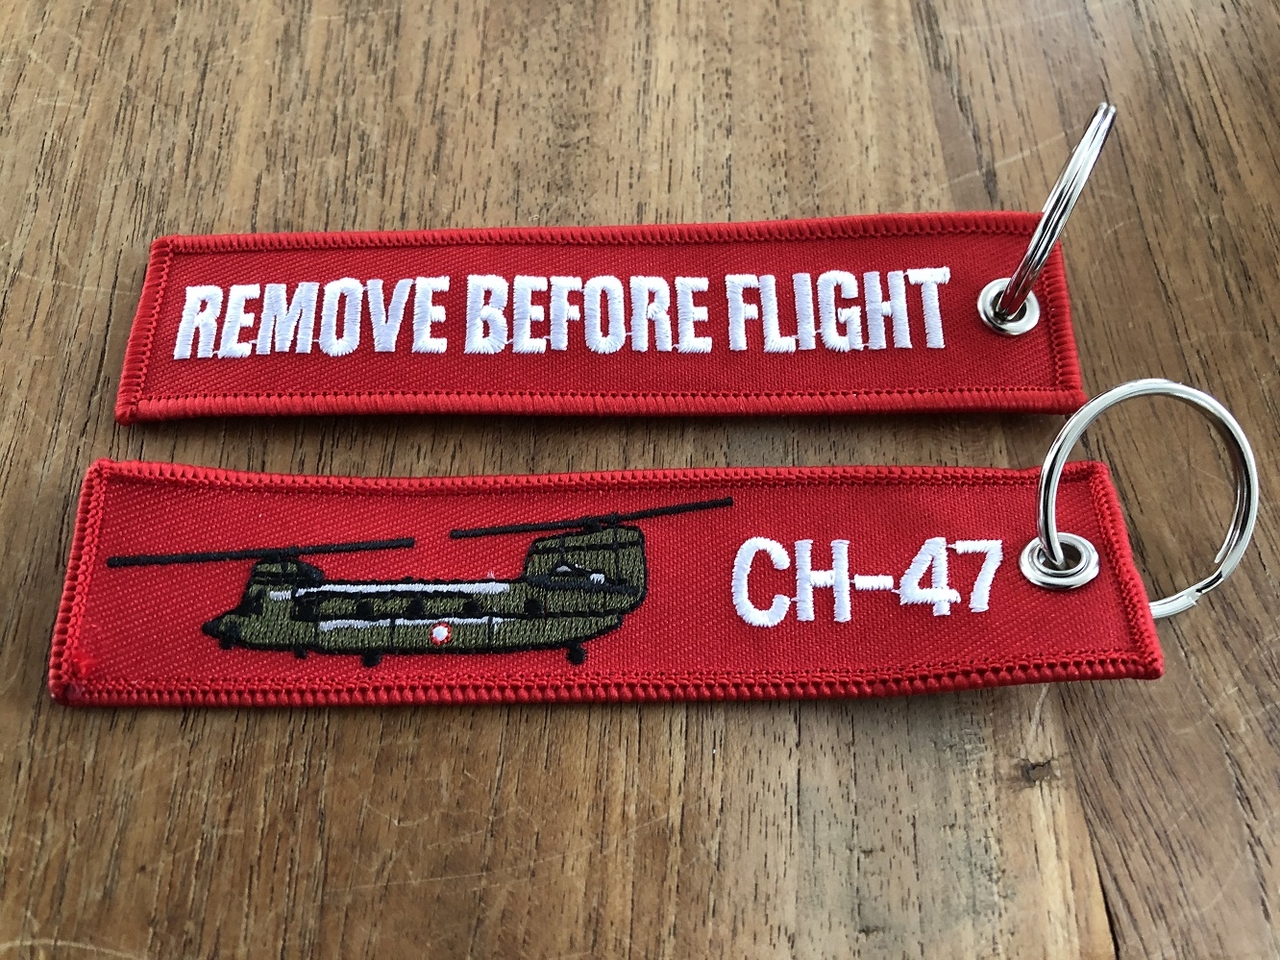 Remove before flight CH-47 Chinook - the Aviation Store.net